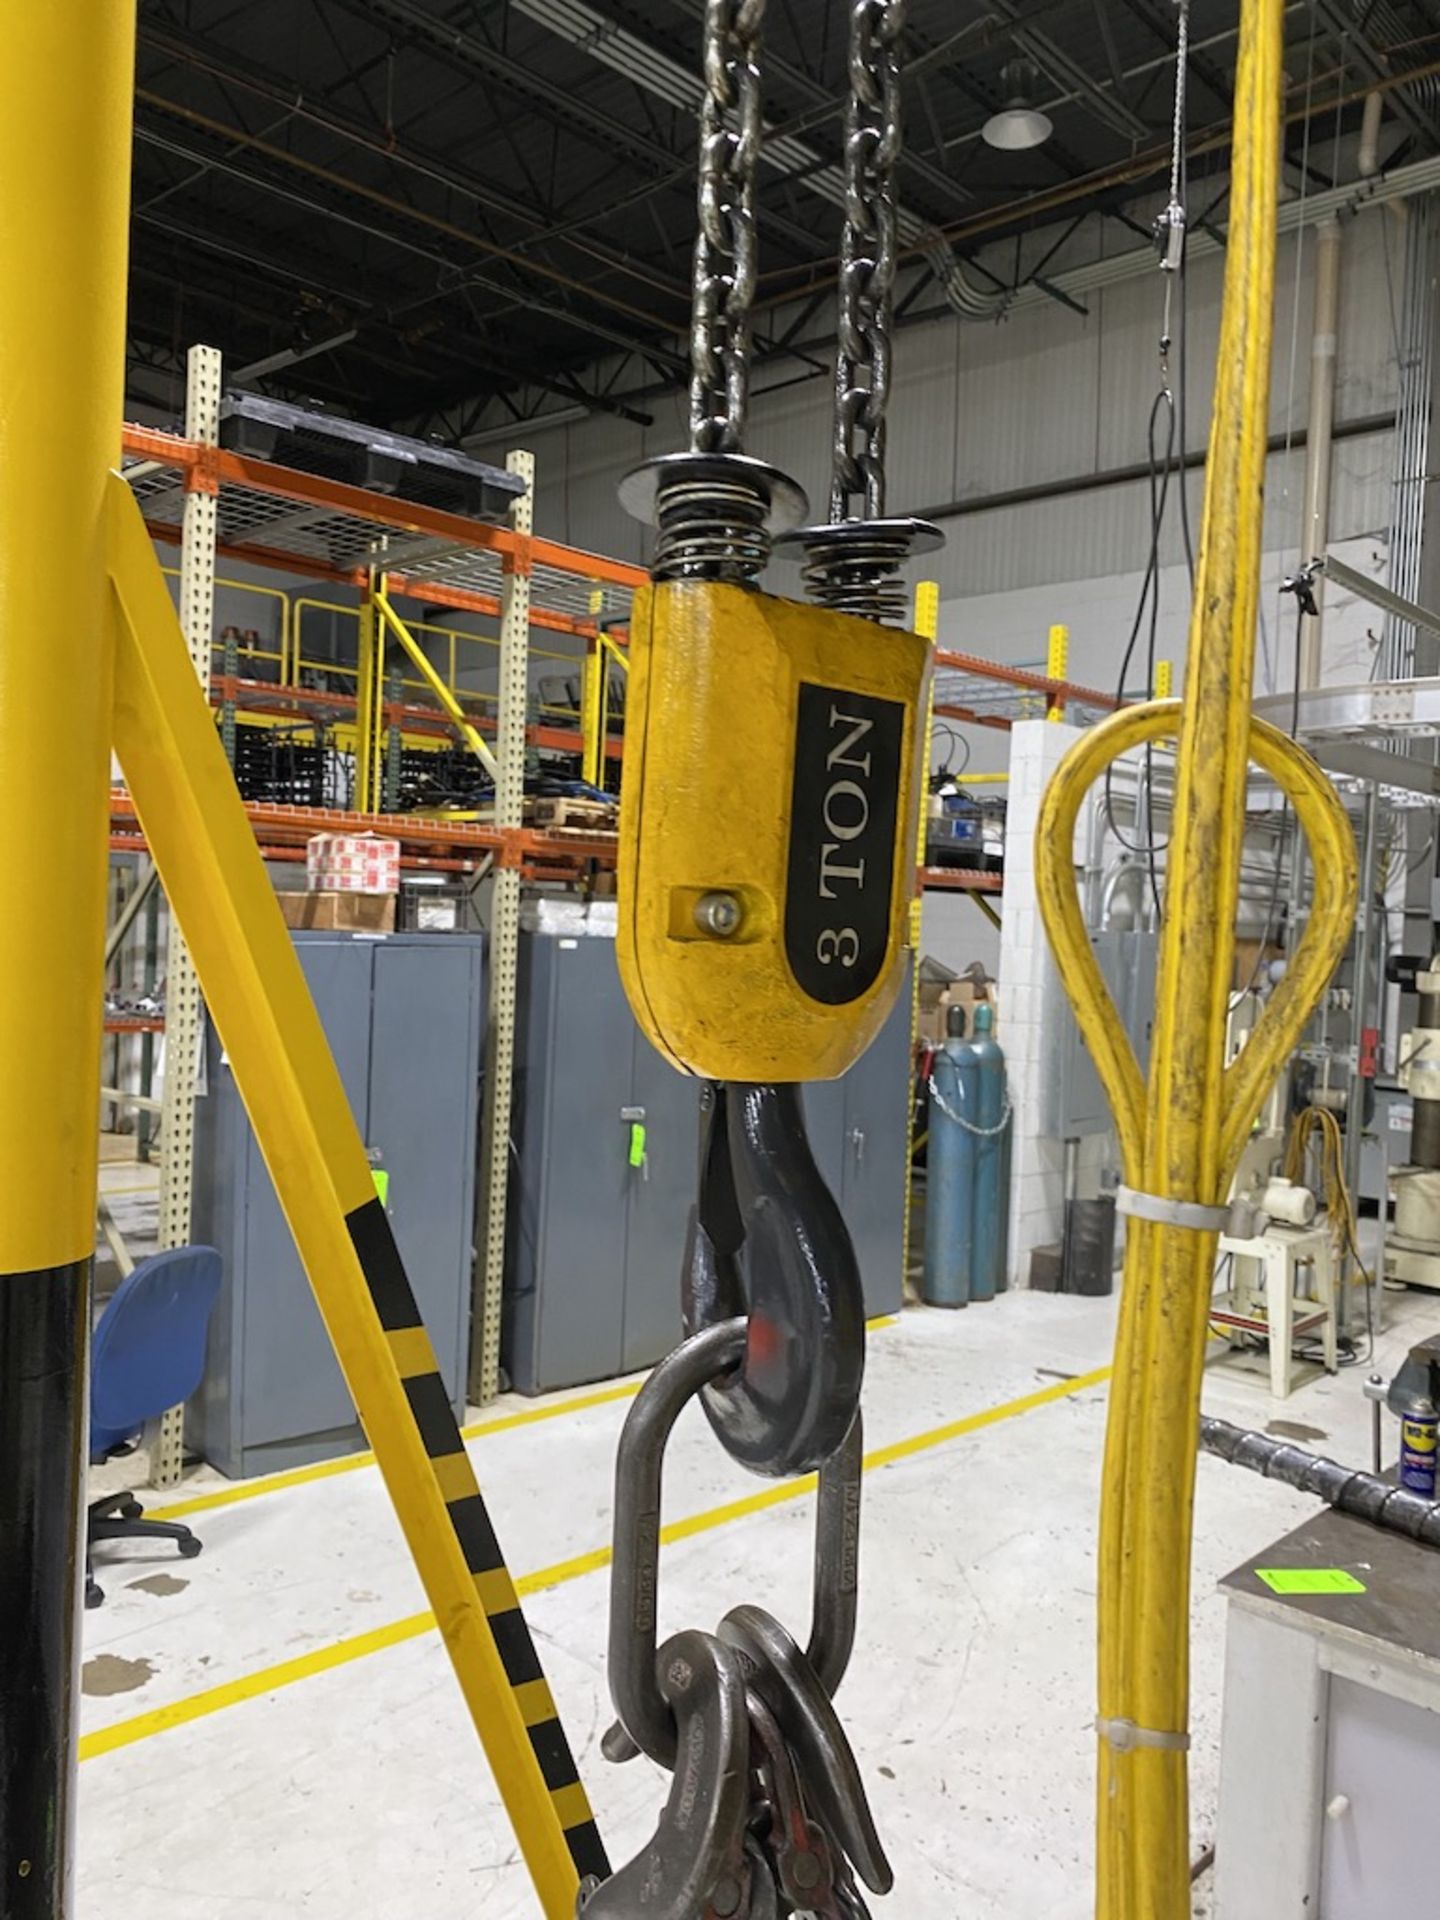 Handling Systems 3 Ton Gantry Crane on Casters with Kone Cranes 3 Ton Hoist, Controller, Heavy Duty - Image 5 of 9